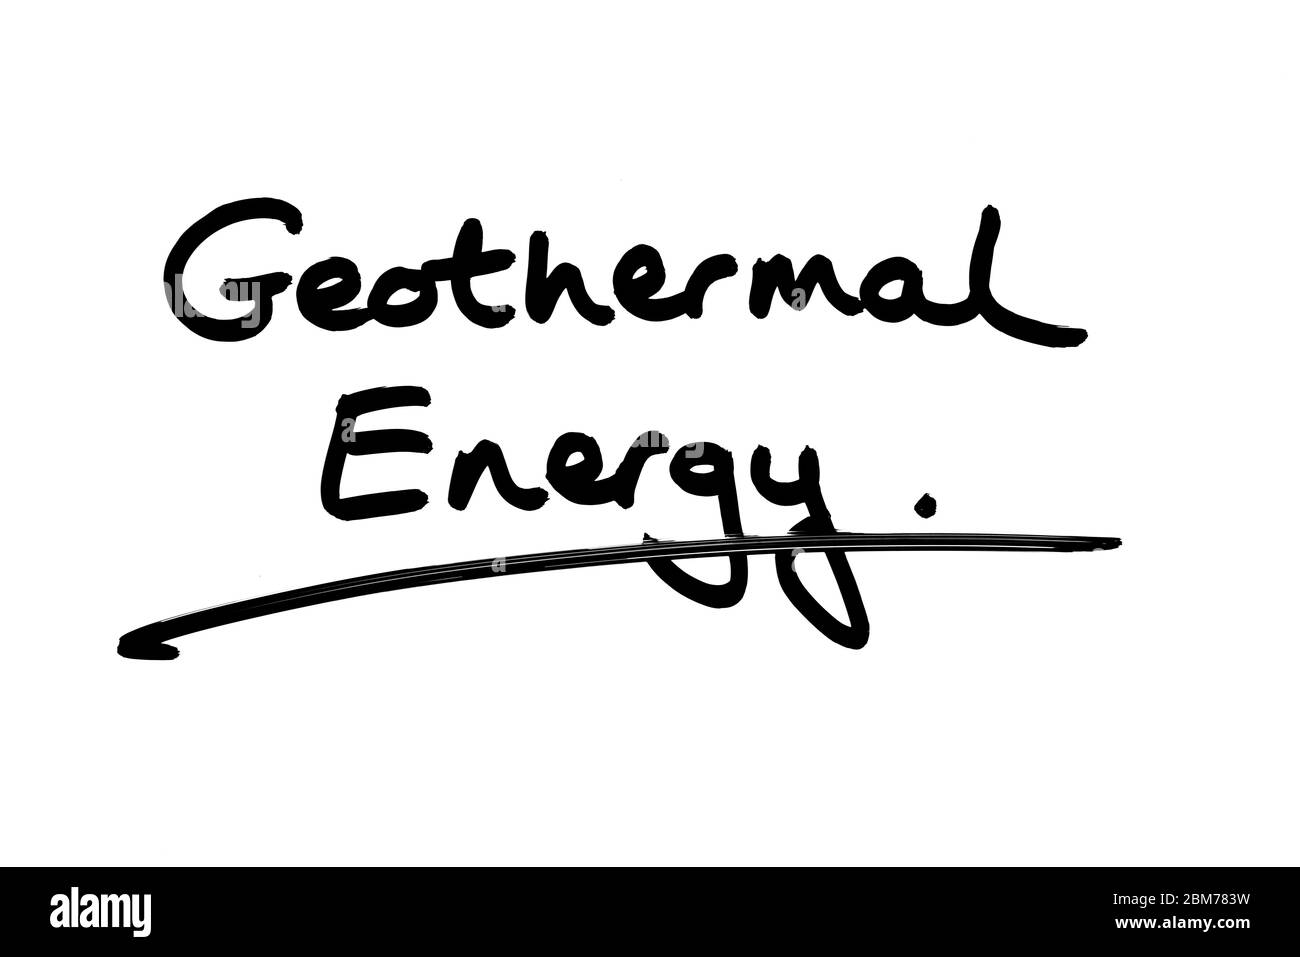 Geothermal Energy handwritten on a white background. Stock Photo